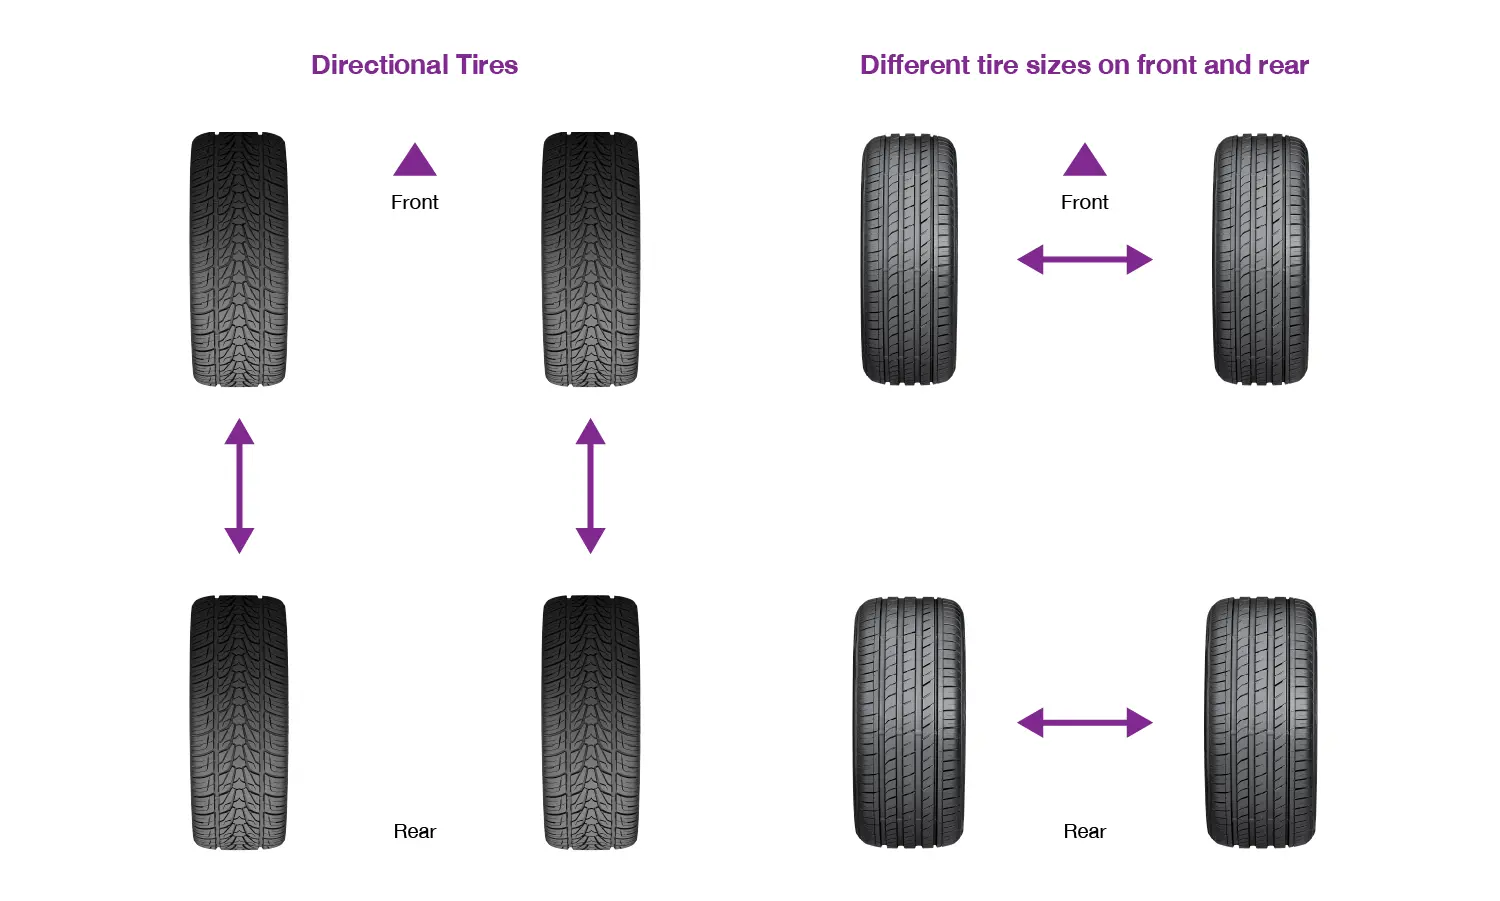 directional & different front and rear size tire rotation patterns